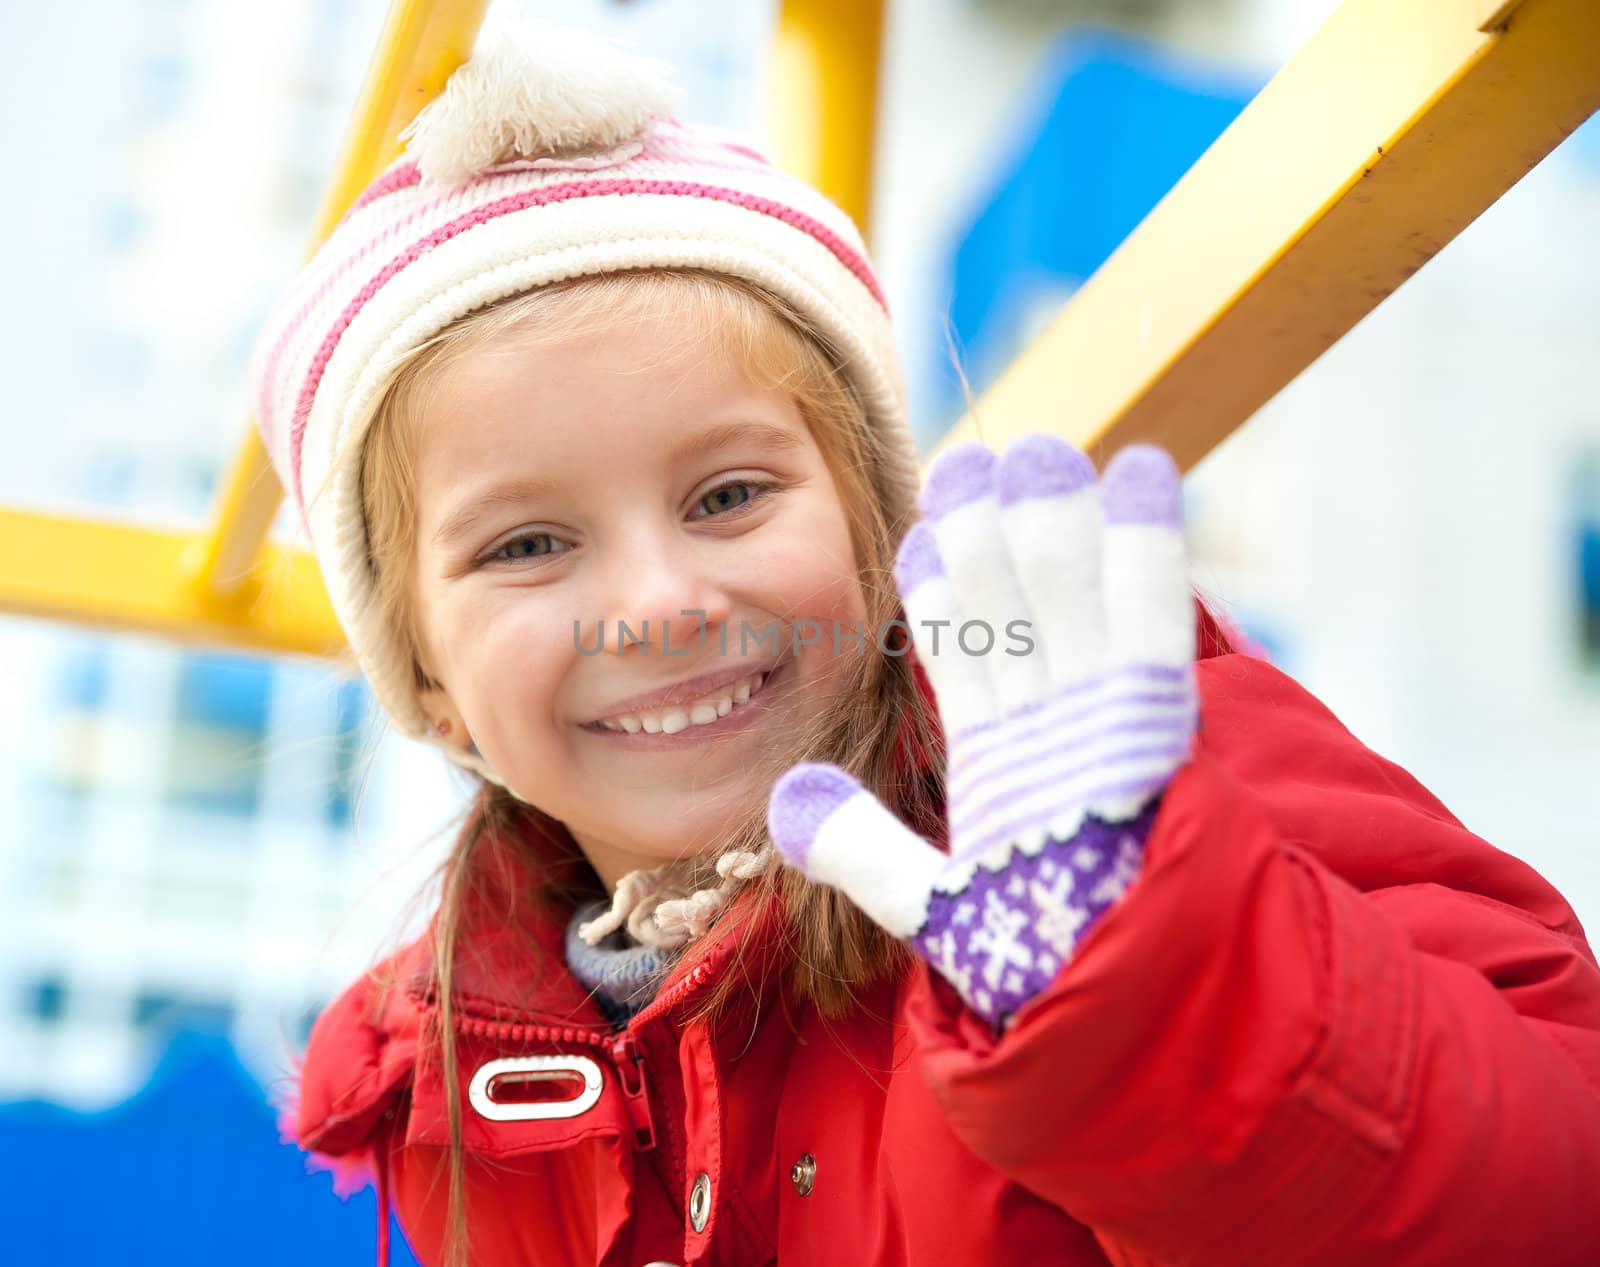 Smiling little girl on outdoor playground equipment